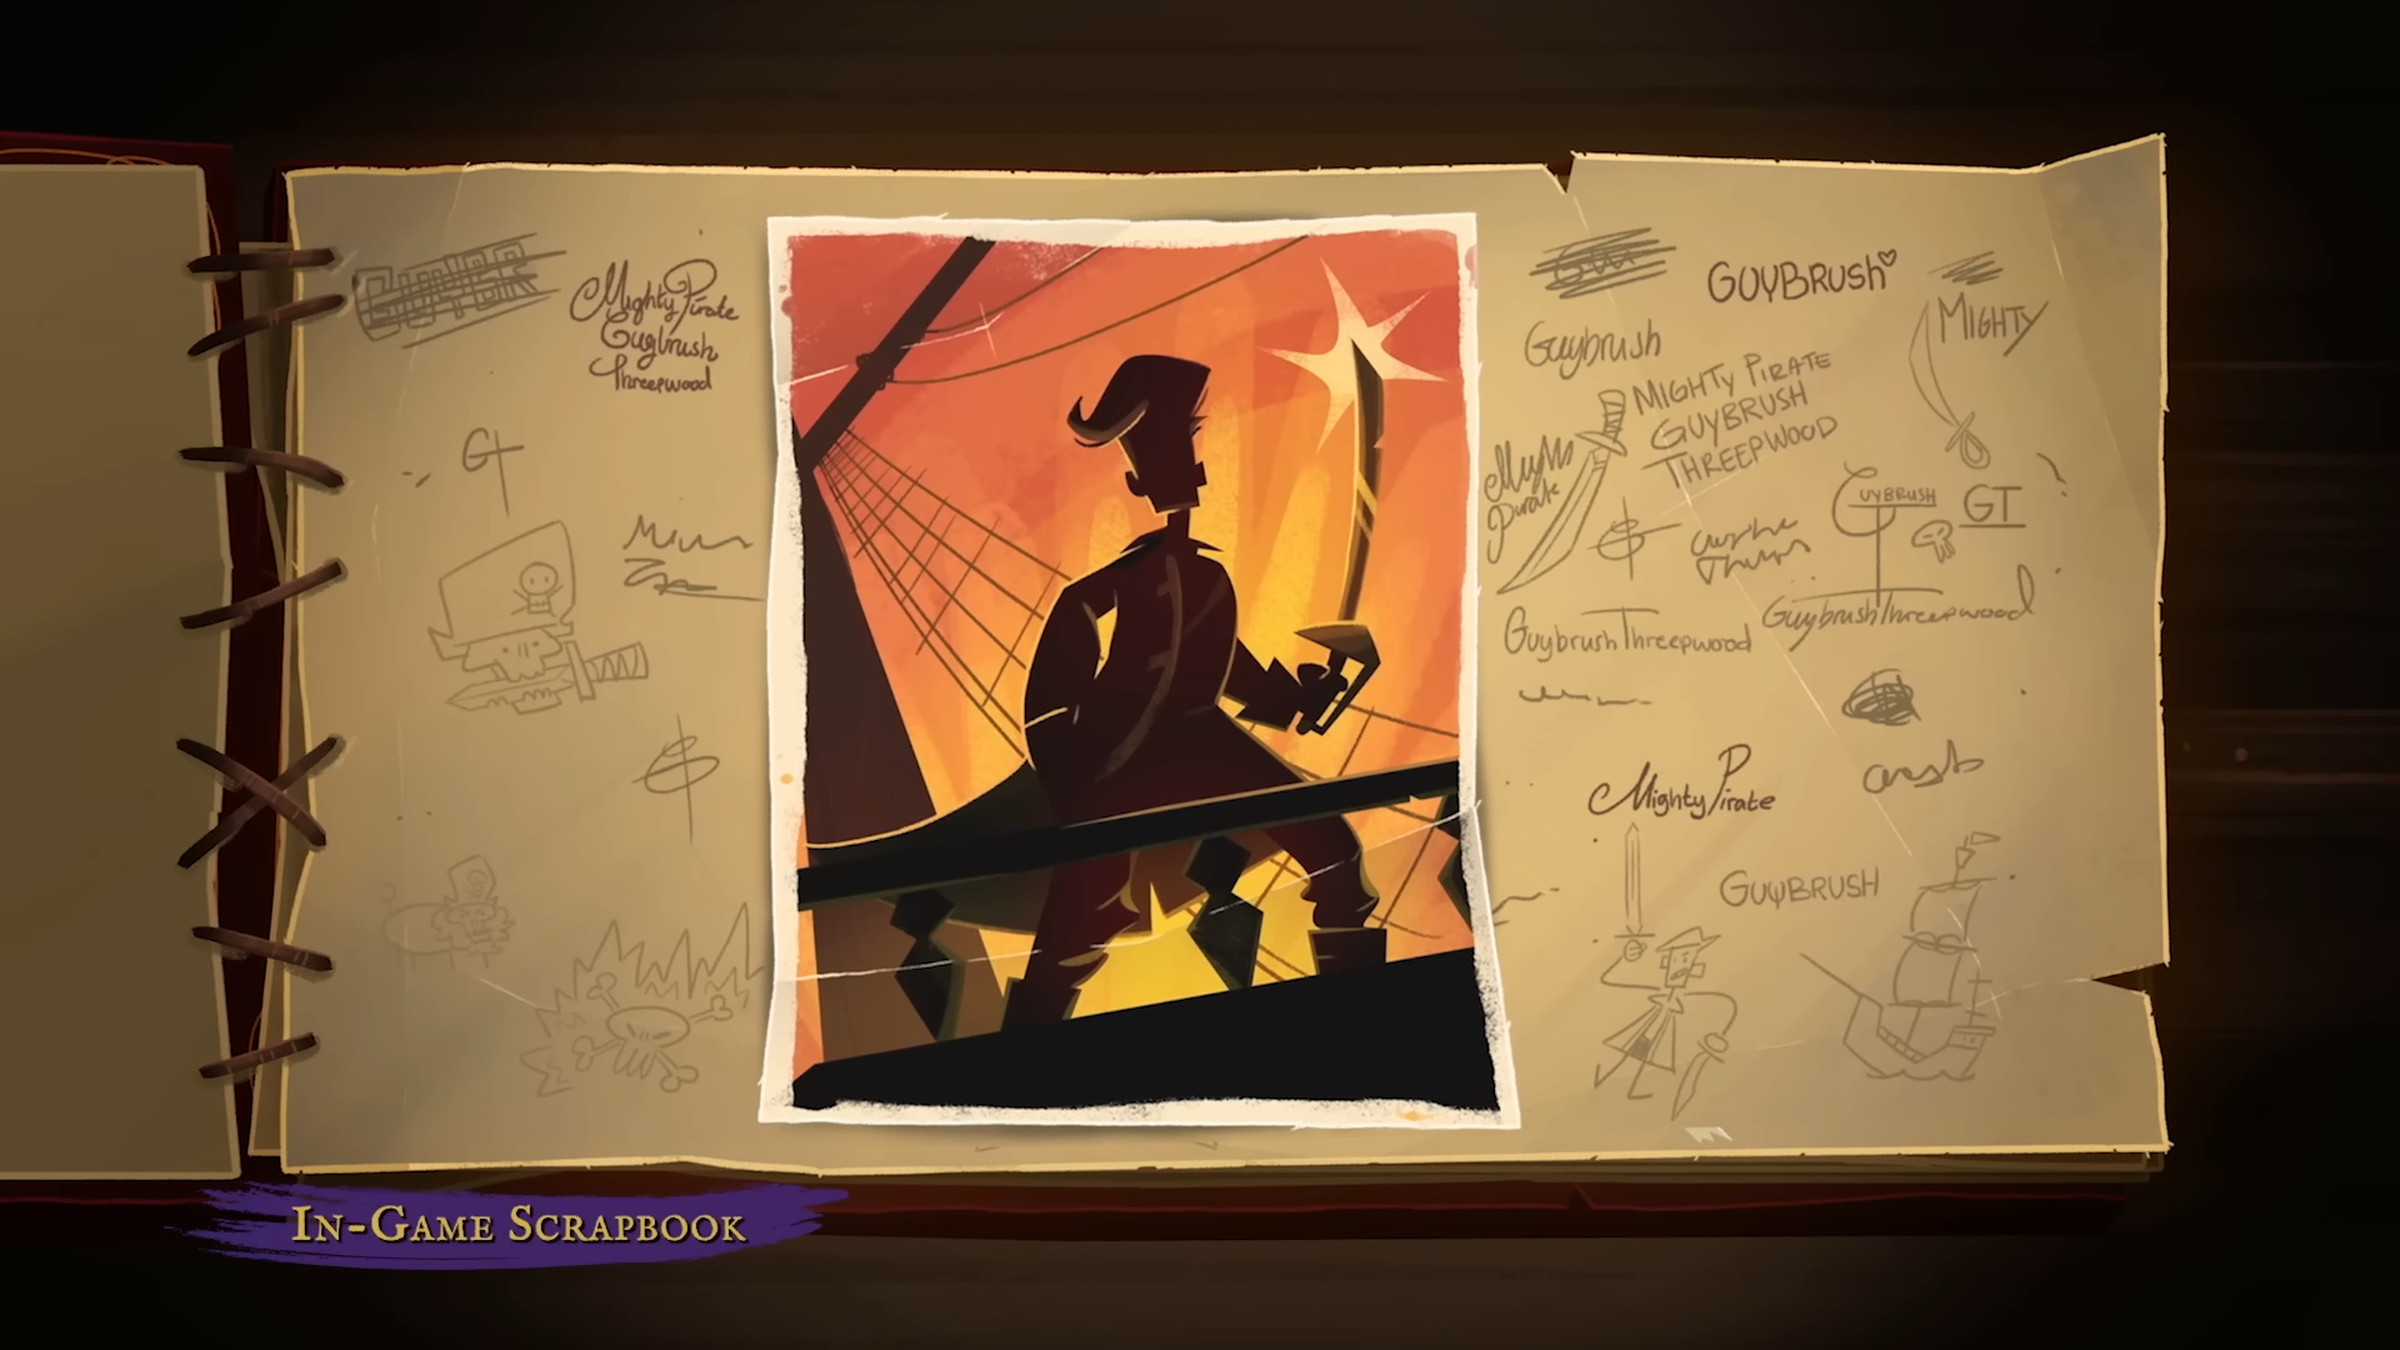 A digital scrapbook opens on a page with a photo of Guybrush Threepwood, the protagonist of the Monkey Island series, standing on a pirate ship with a cutlass in hand. Around the photo are doodle and scribbles that appear to be from Threepwood himself.